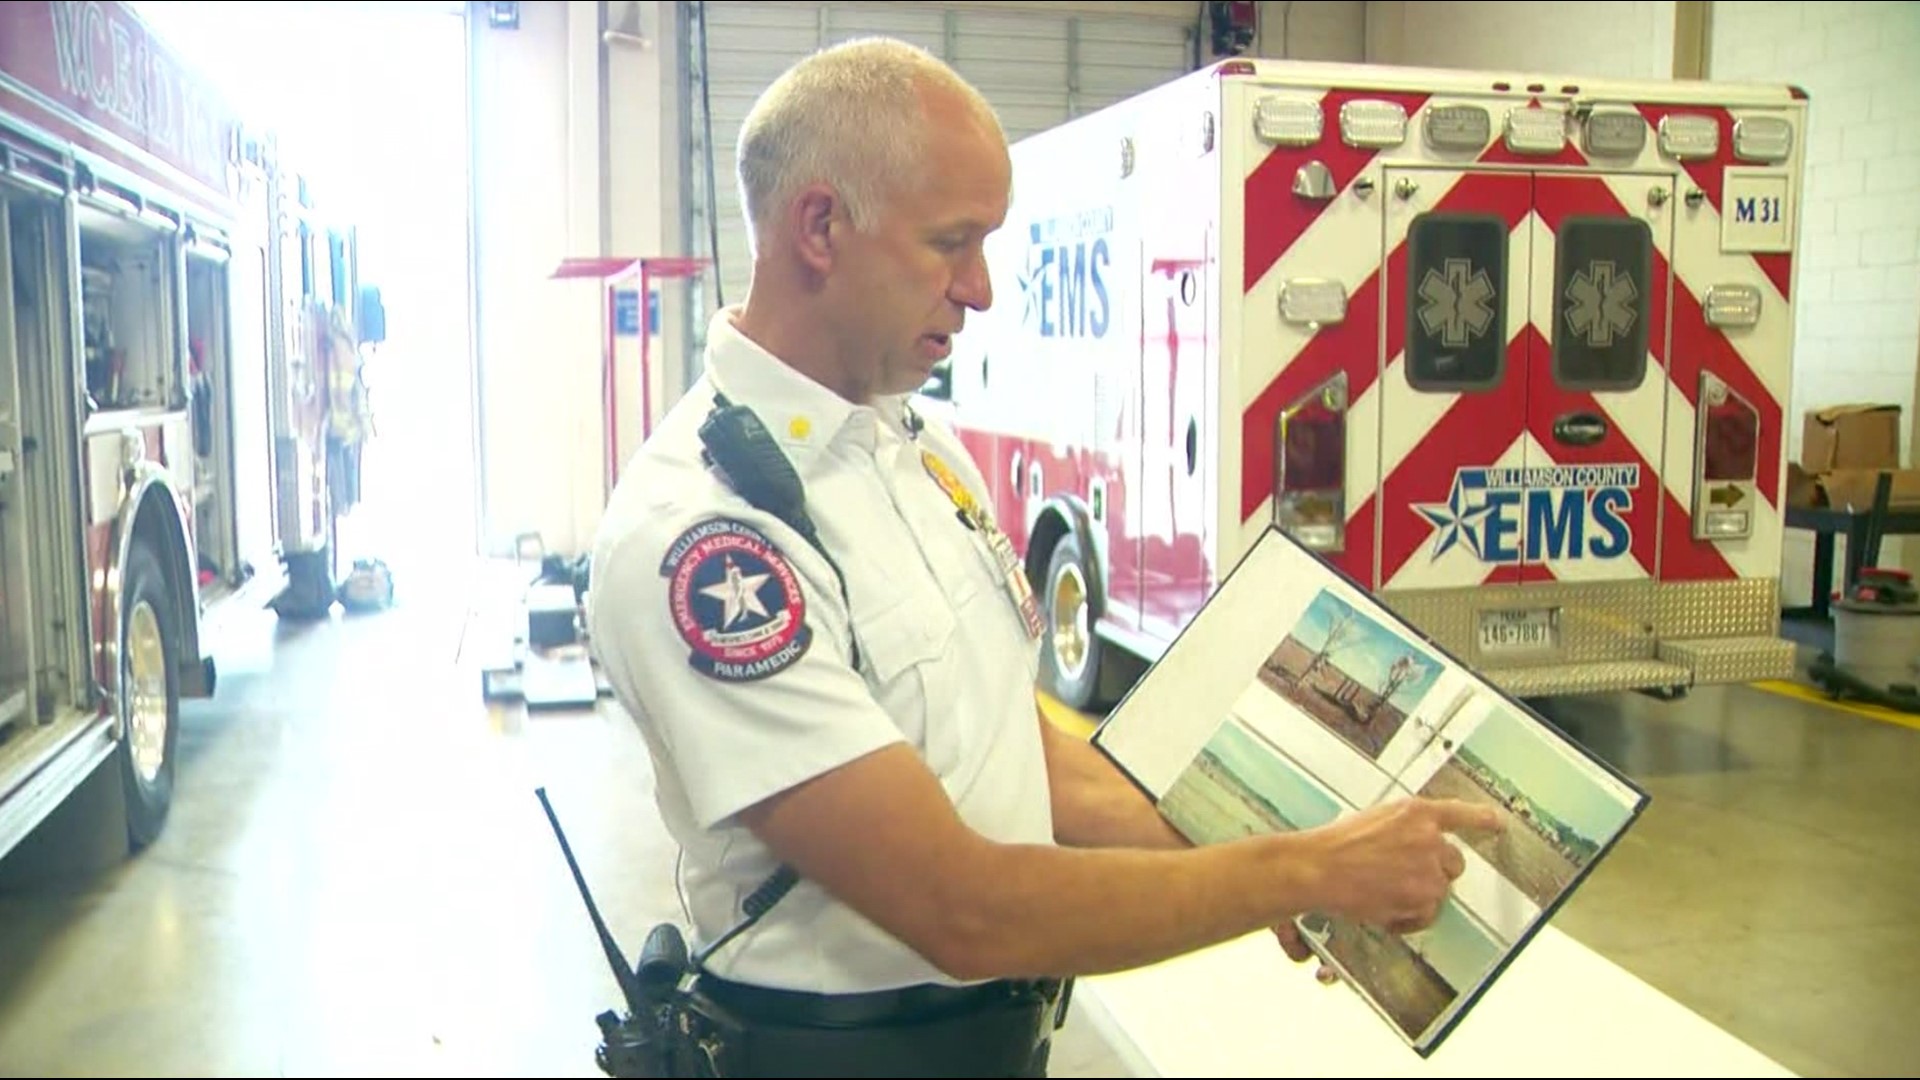 When tragedy strikes, first responders spring into action. EMS workers and volunteer civilians reflected on the recovery efforts made on May 27, 1997.